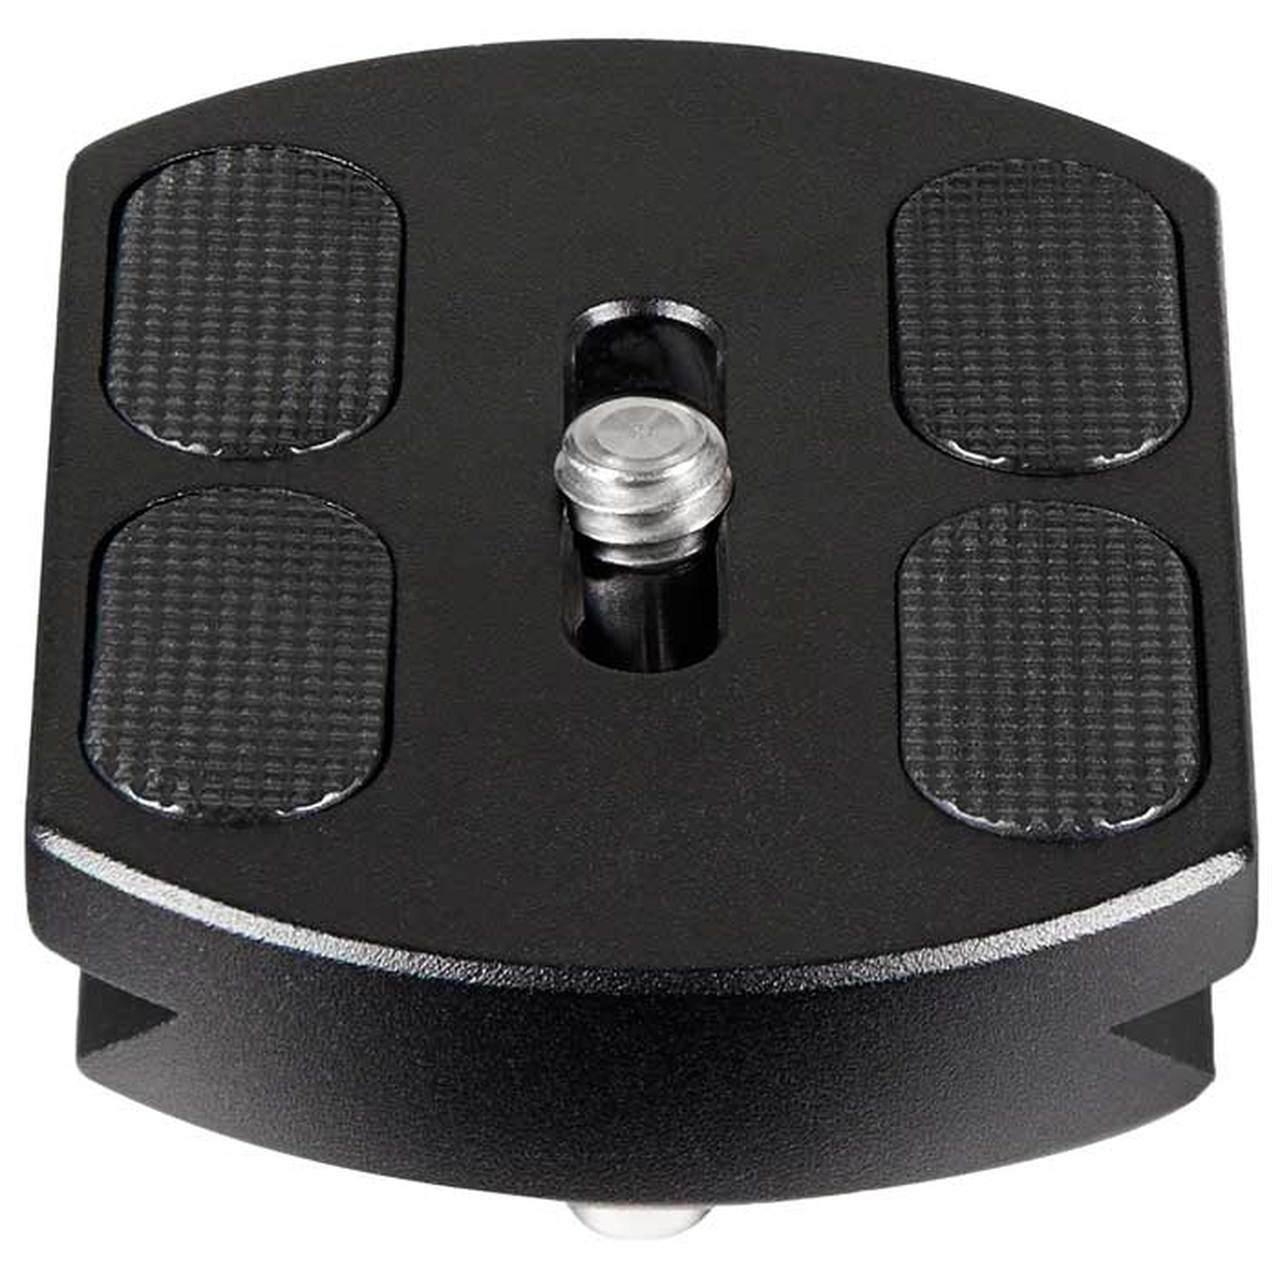 Promaster 8020 Quick Release Plate for PH25 Panoramic Head